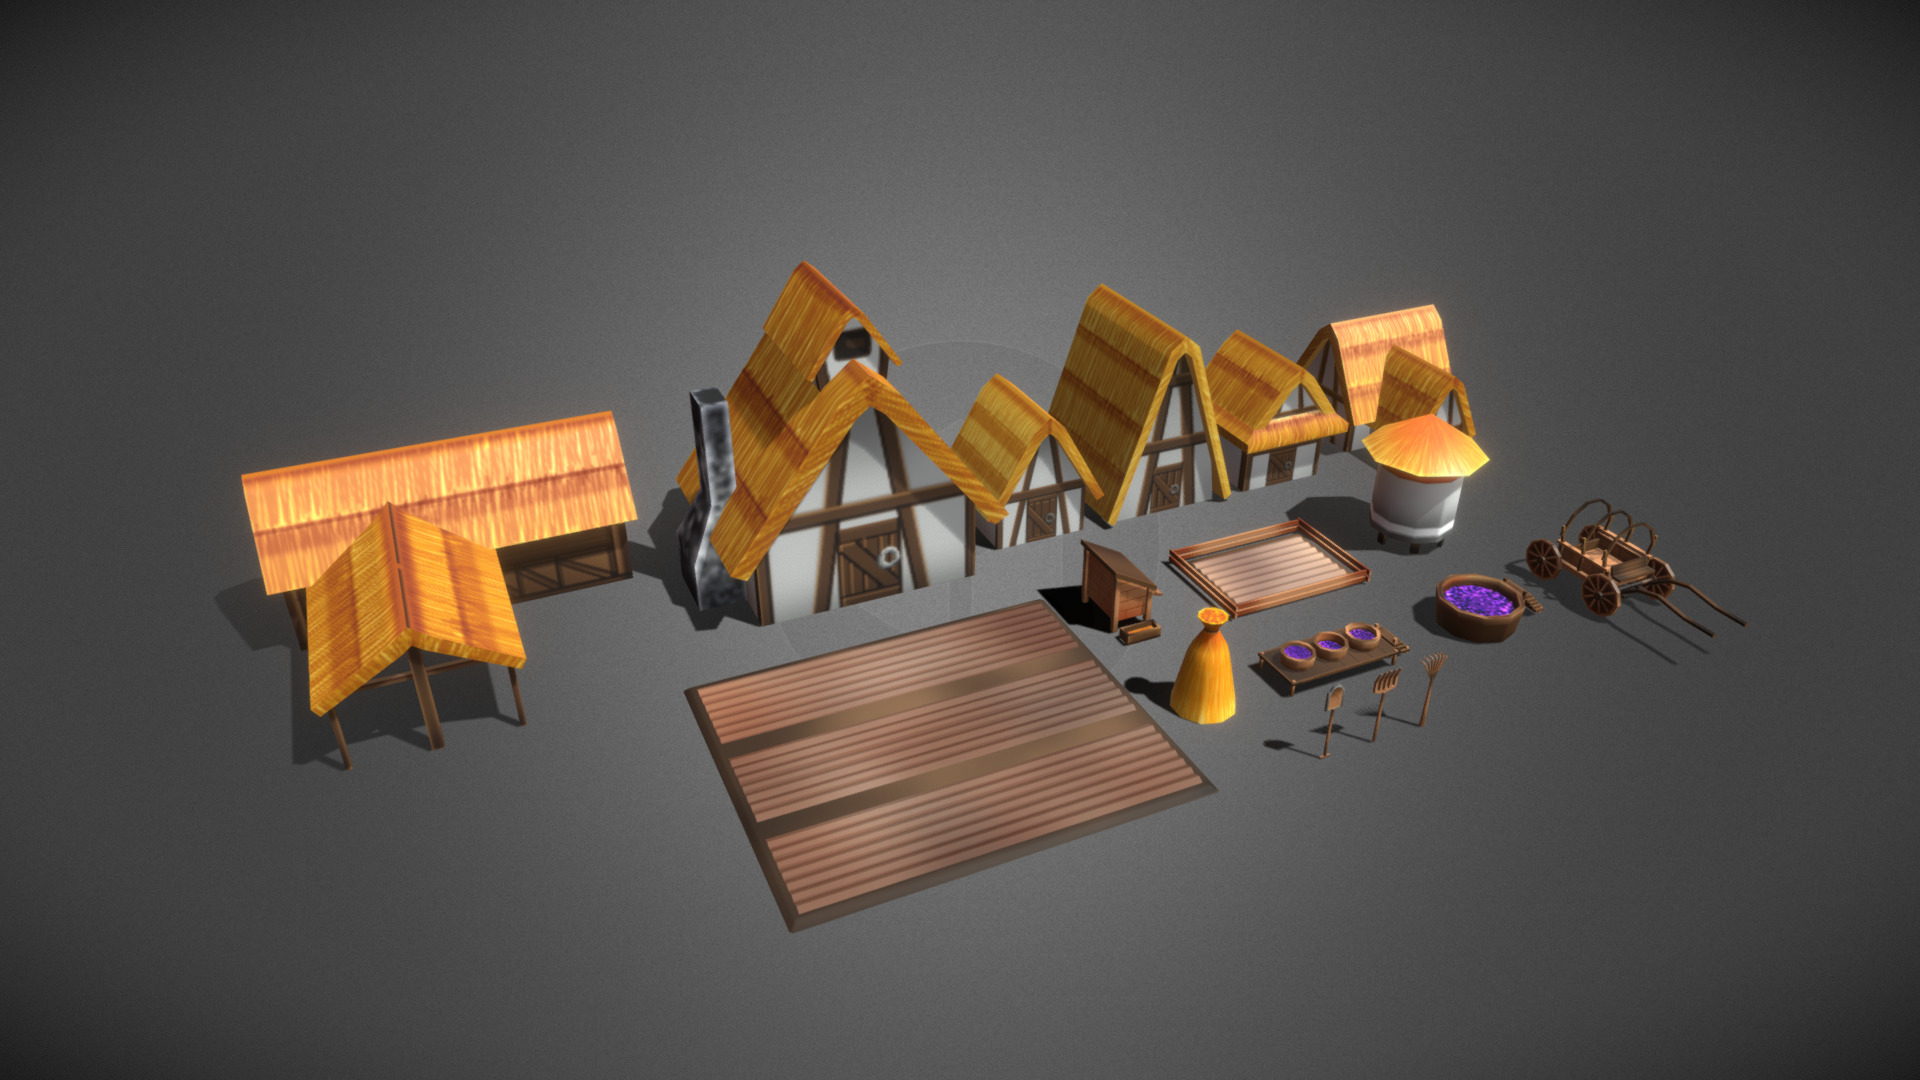 3D model Early Medieval Village – Lowpoly - This is a 3D model of the Early Medieval Village - Lowpoly. The 3D model is about a group of wooden buildings.